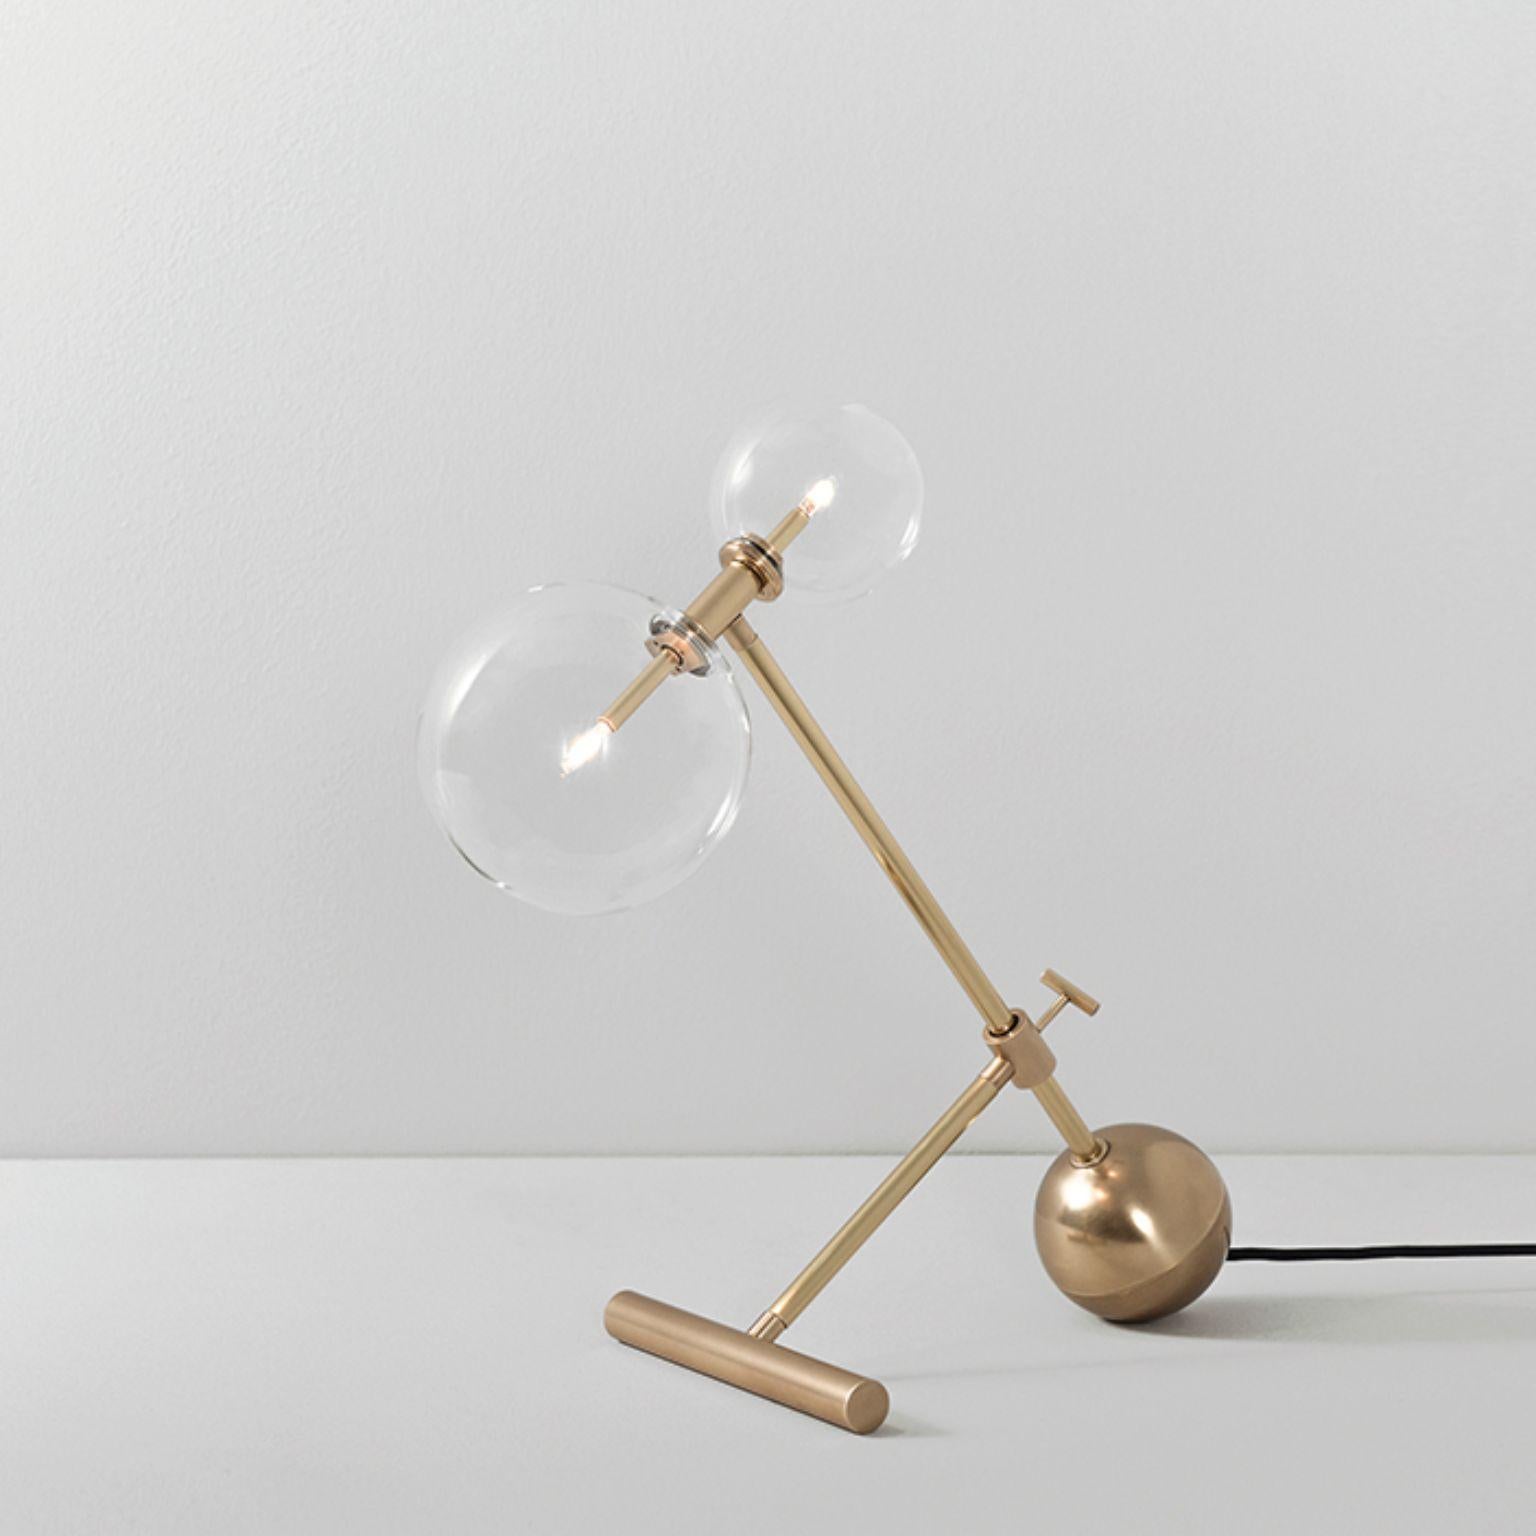 Zosia Contemporary brass table lamp by Schwung
Dimensions: W 20 x D 42 x H 54 cm
Materials: Natural brass, hand blown glass globes
Other finishes available.

Cord 2m with inline on-off switch and plug. Switch location 50cm from the base.
Glass